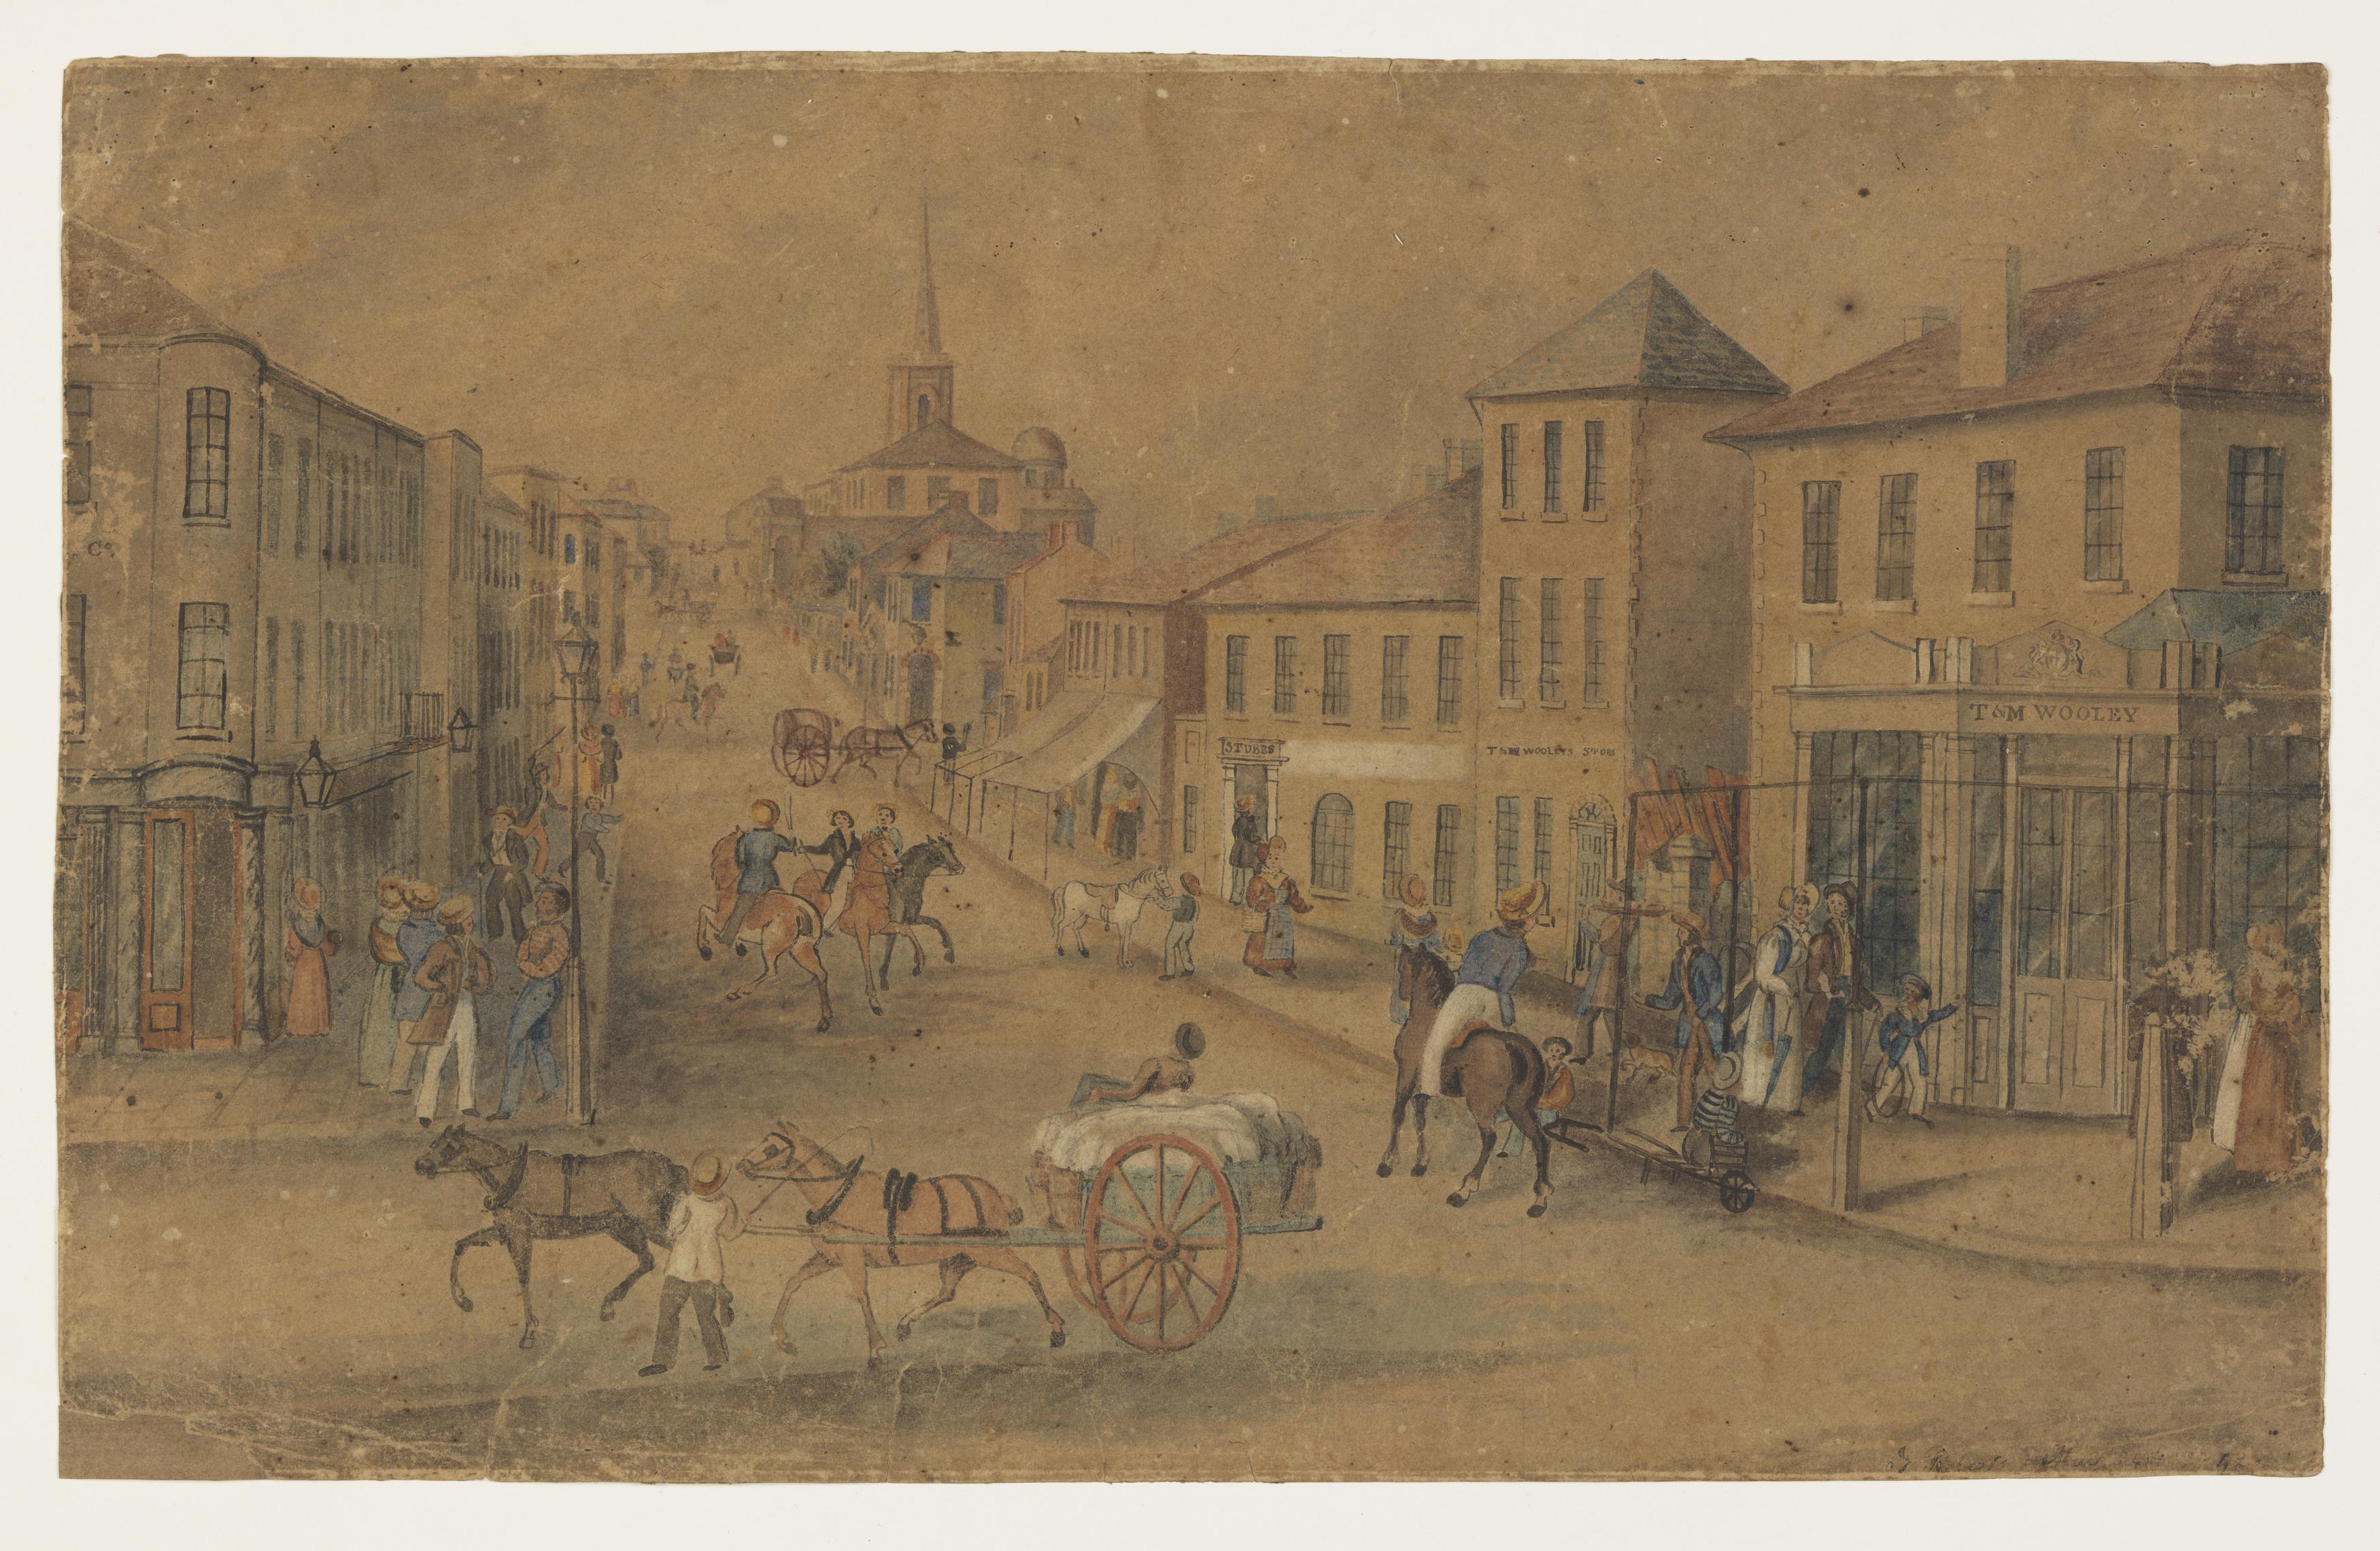 Hand draw illustration of a city street - a horse and carriage travels along the street, a church spire looms in the background. 